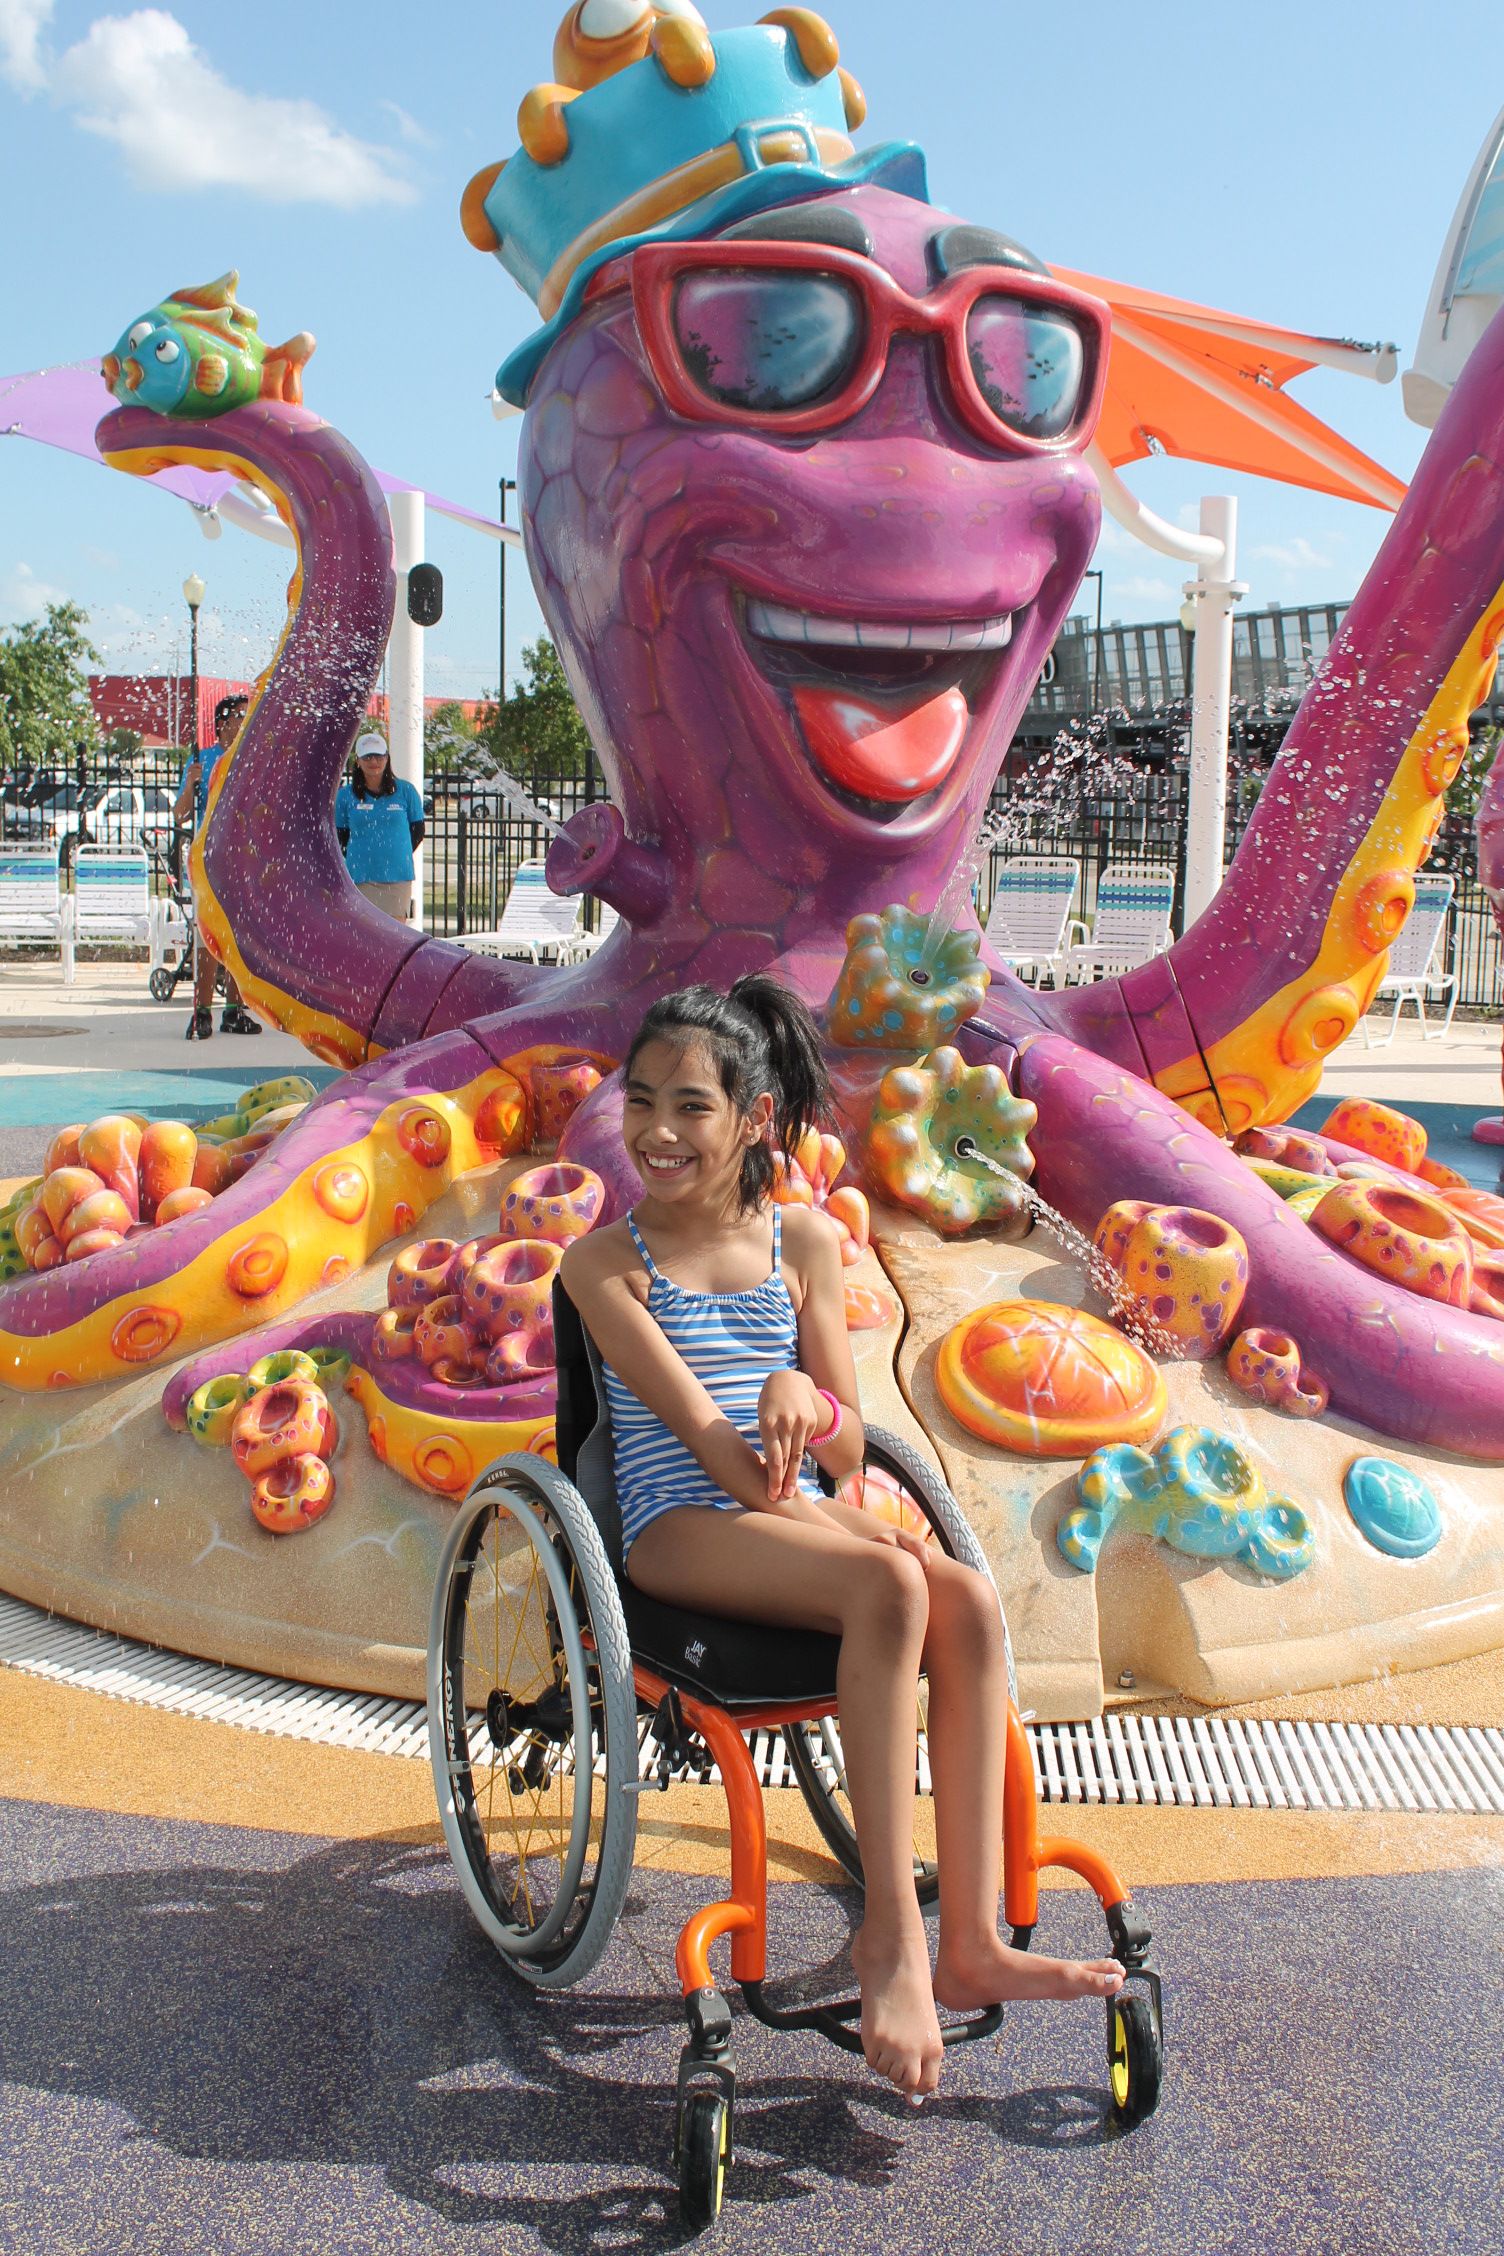 the launch of the fun new splash park will be something the whole family will be able to enjoy, with the whole park entirely wheelchair accessible so no one has to miss out on the fun.